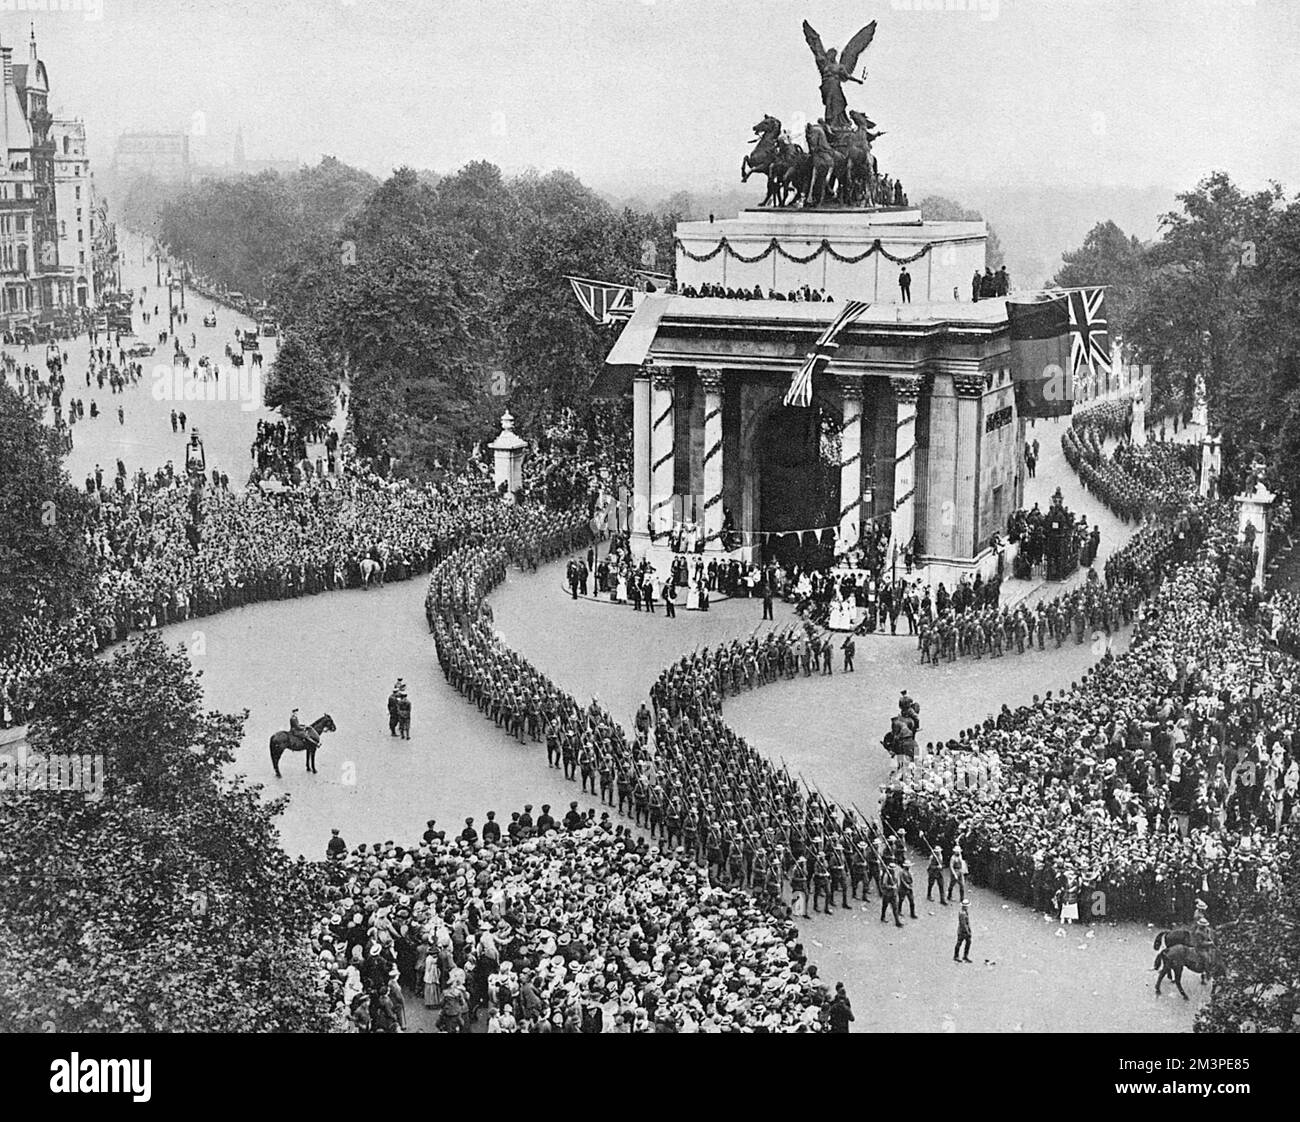 American troops arriving at Hyde Park Corner from Buckingham Palace - part of the Peace Day celebrations in London following the signing of the Treaty of Versailles.     Date: 1919 Stock Photo